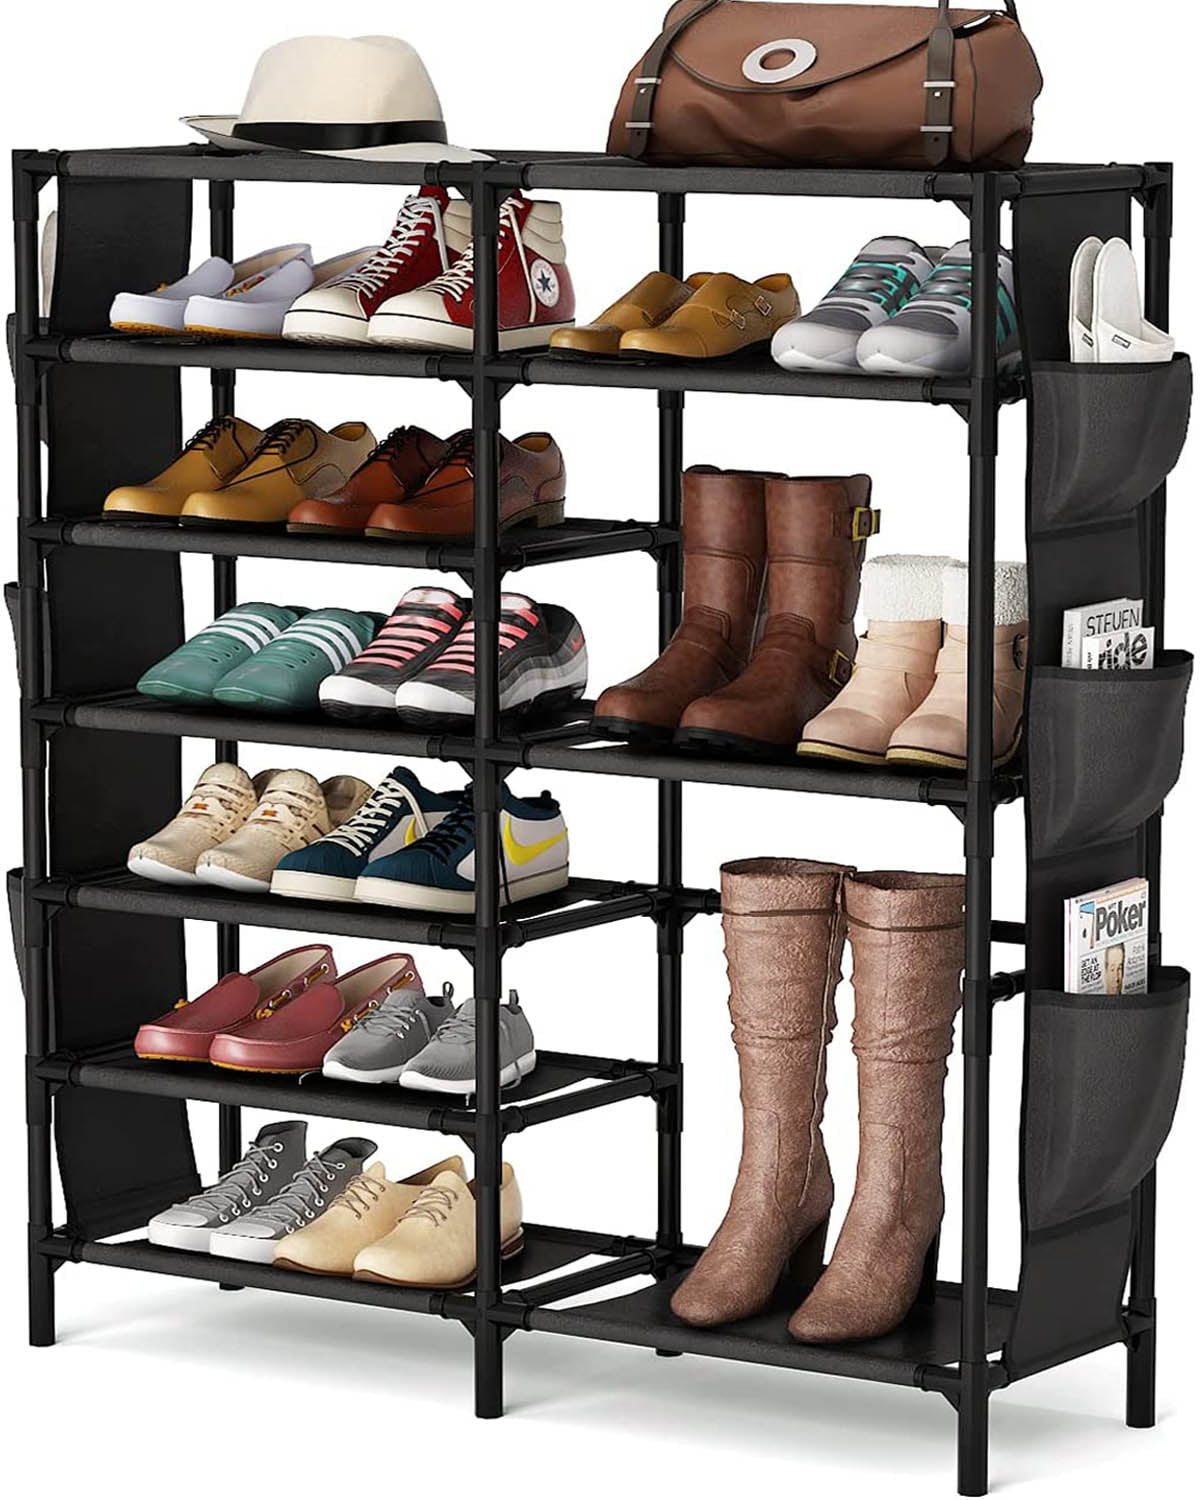 2-3-4 tier wooden shoe rack shoe cabinet storage keep shoes in managed way 